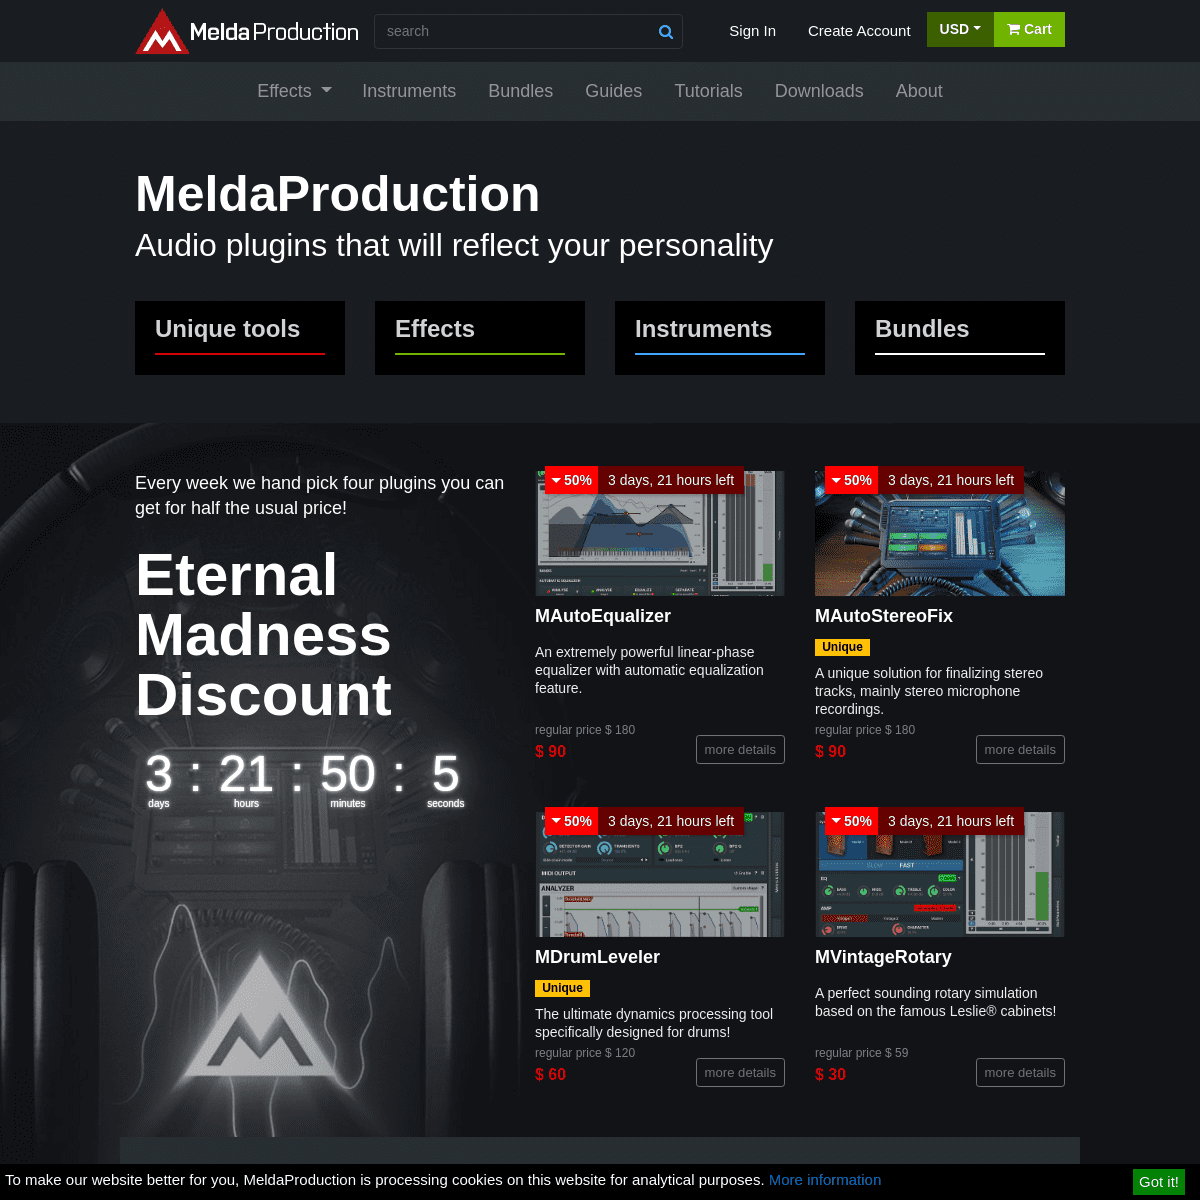 A complete backup of meldaproduction.com